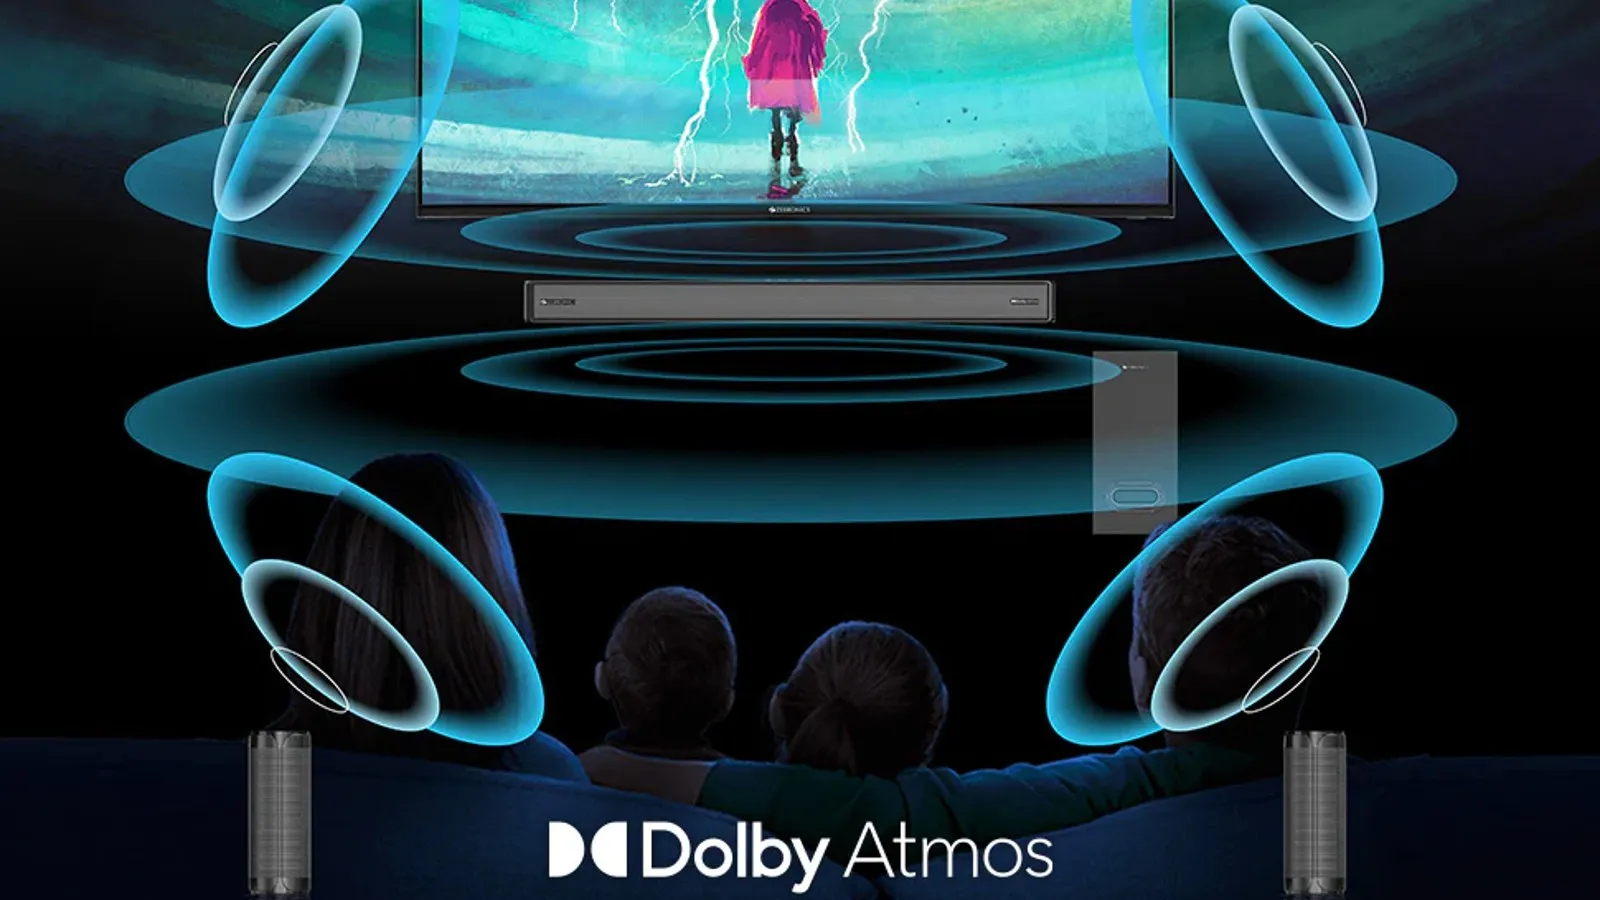 Why you need Dolby Atmos, the sound technology that brings movies